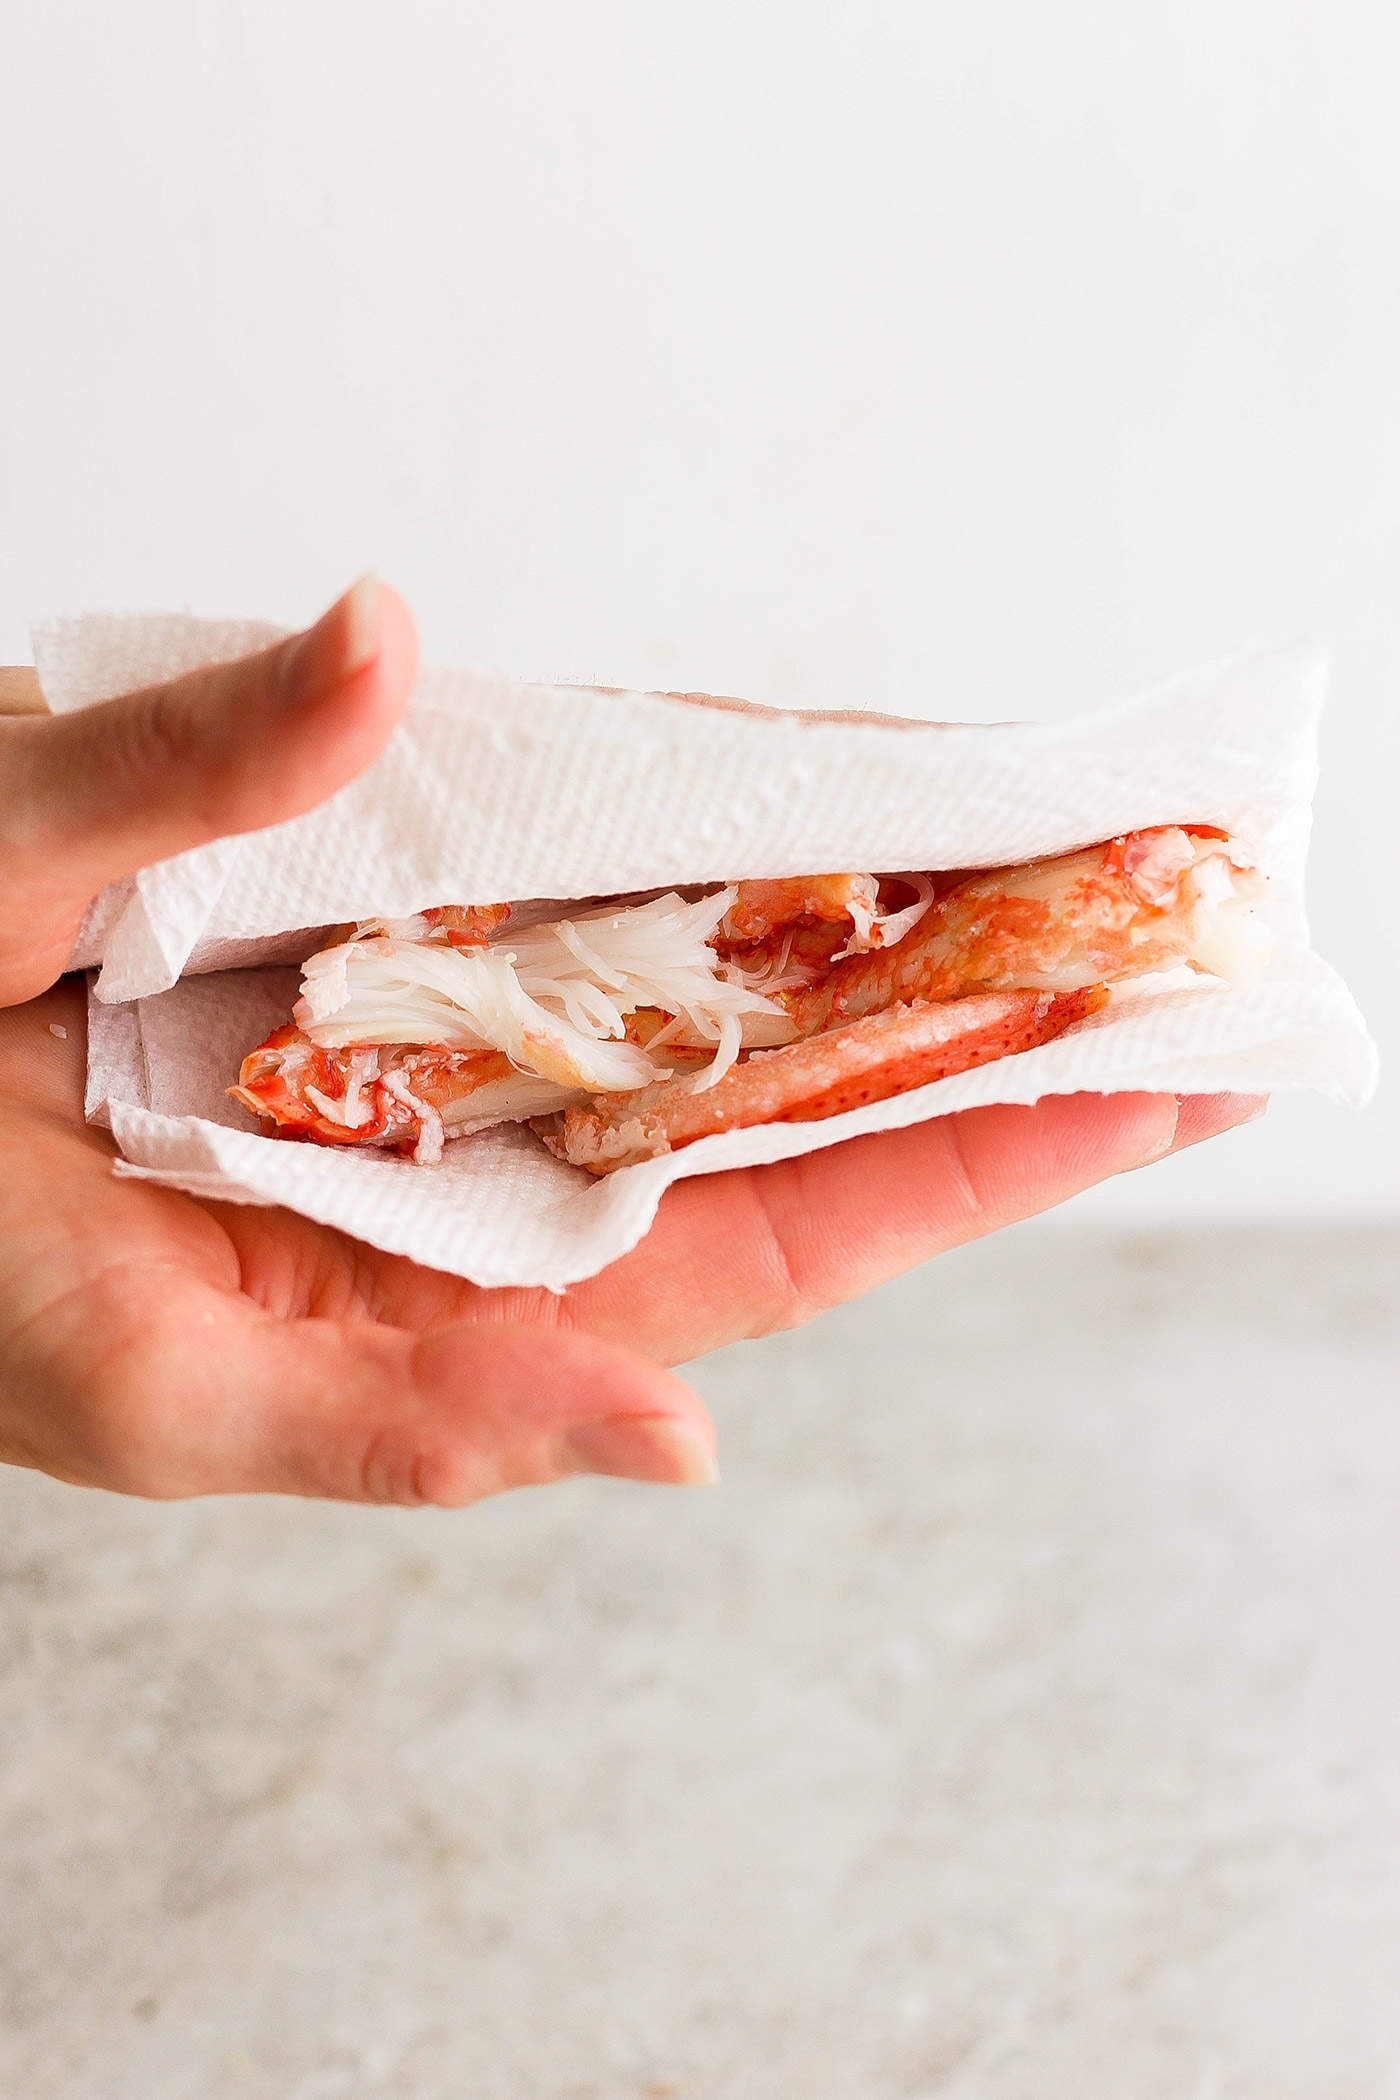 A hand holds a paper towel folded over shrimp and crab to dry them.